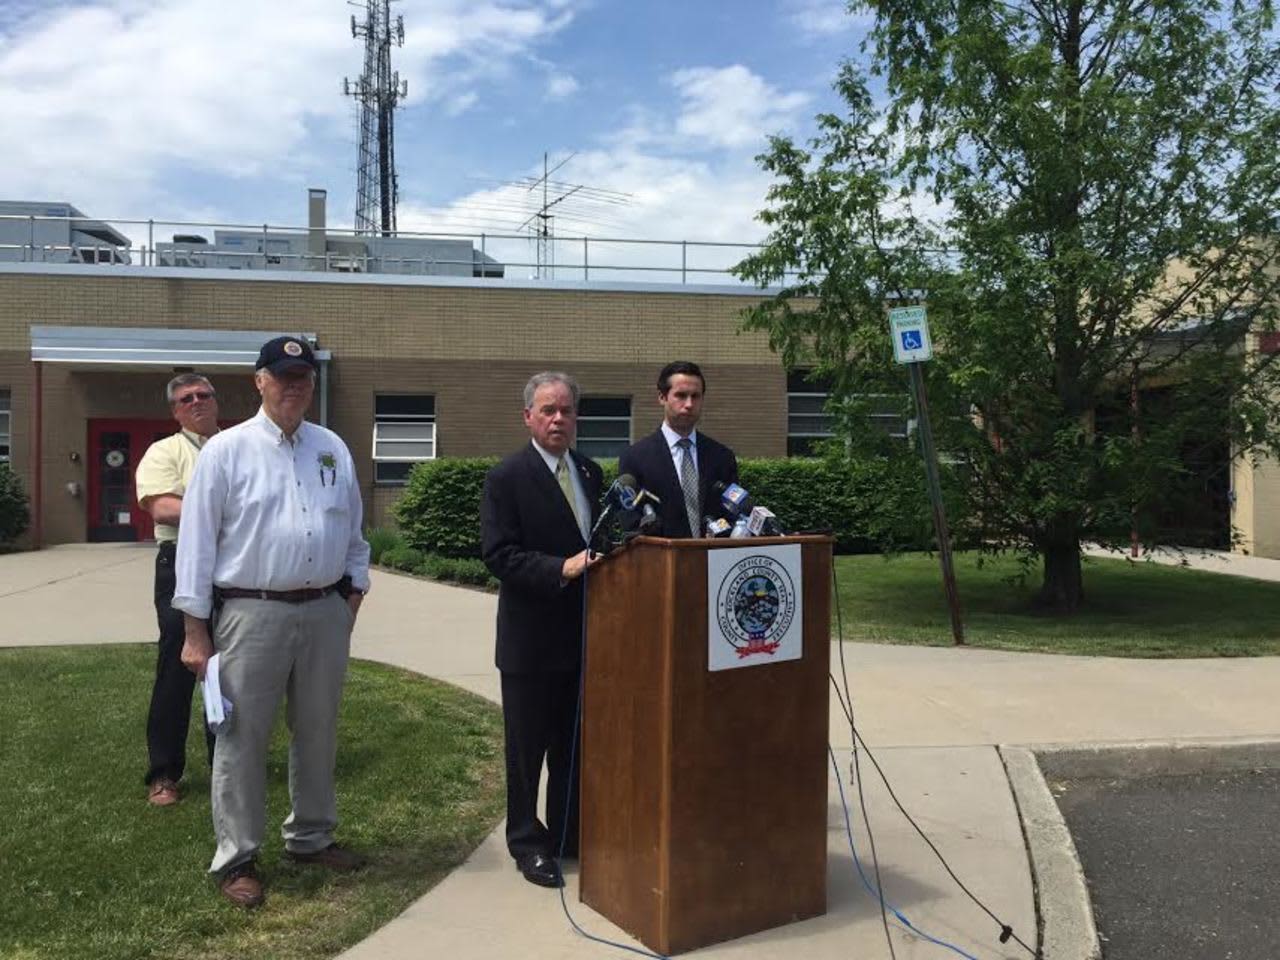 County Executive Ed Day and Assemblyman Ken Zebrowski address the media during a press conference where they announced that the county will conduct the fire inspections for 49 private schools in Rockland.